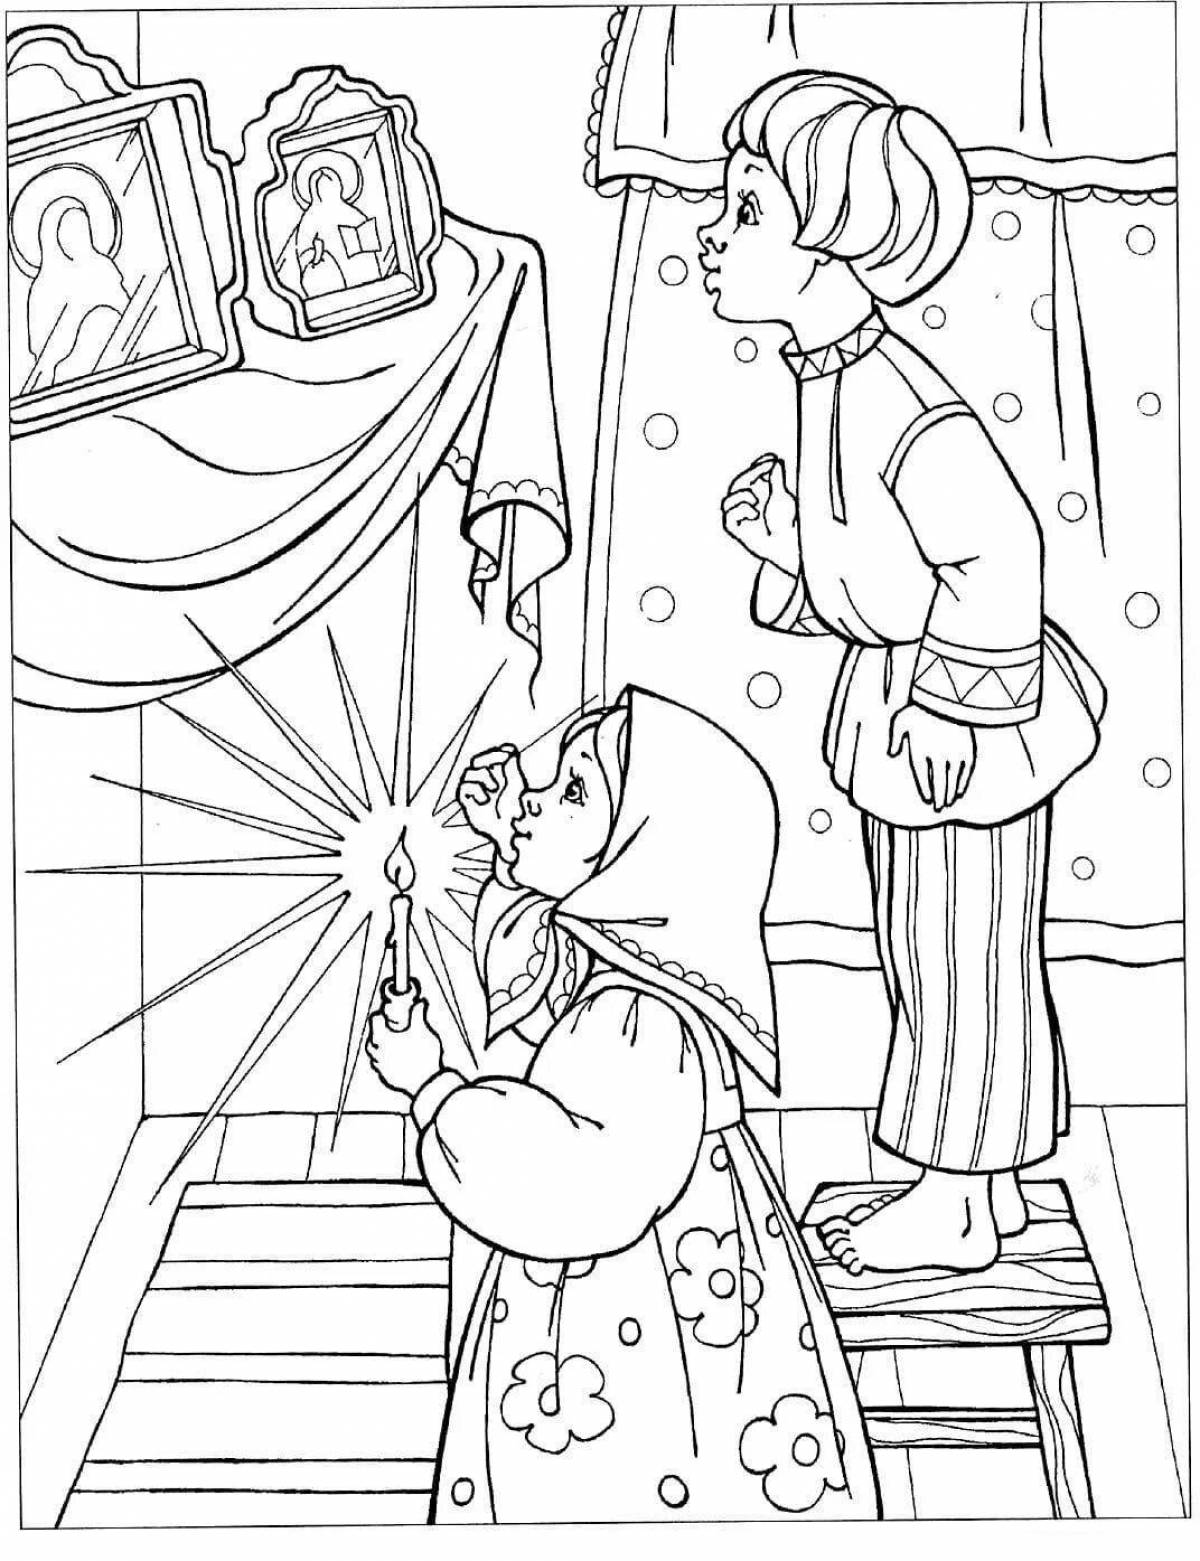 Coloring page glamorous orthodox holiday